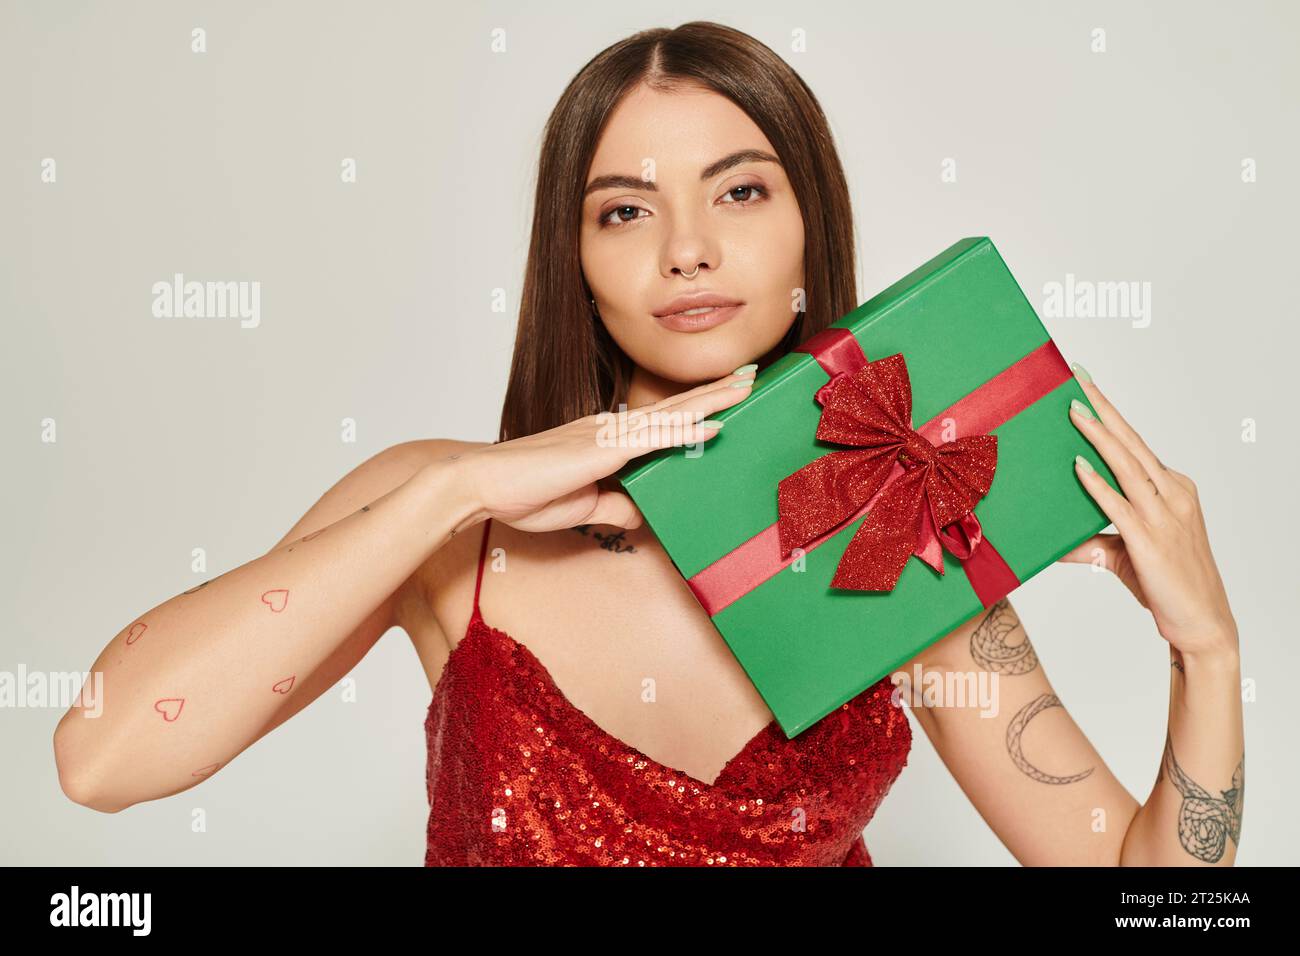 beautiful woman with piercing and tattoos with present in hands looking at camera, holiday gifts Stock Photo